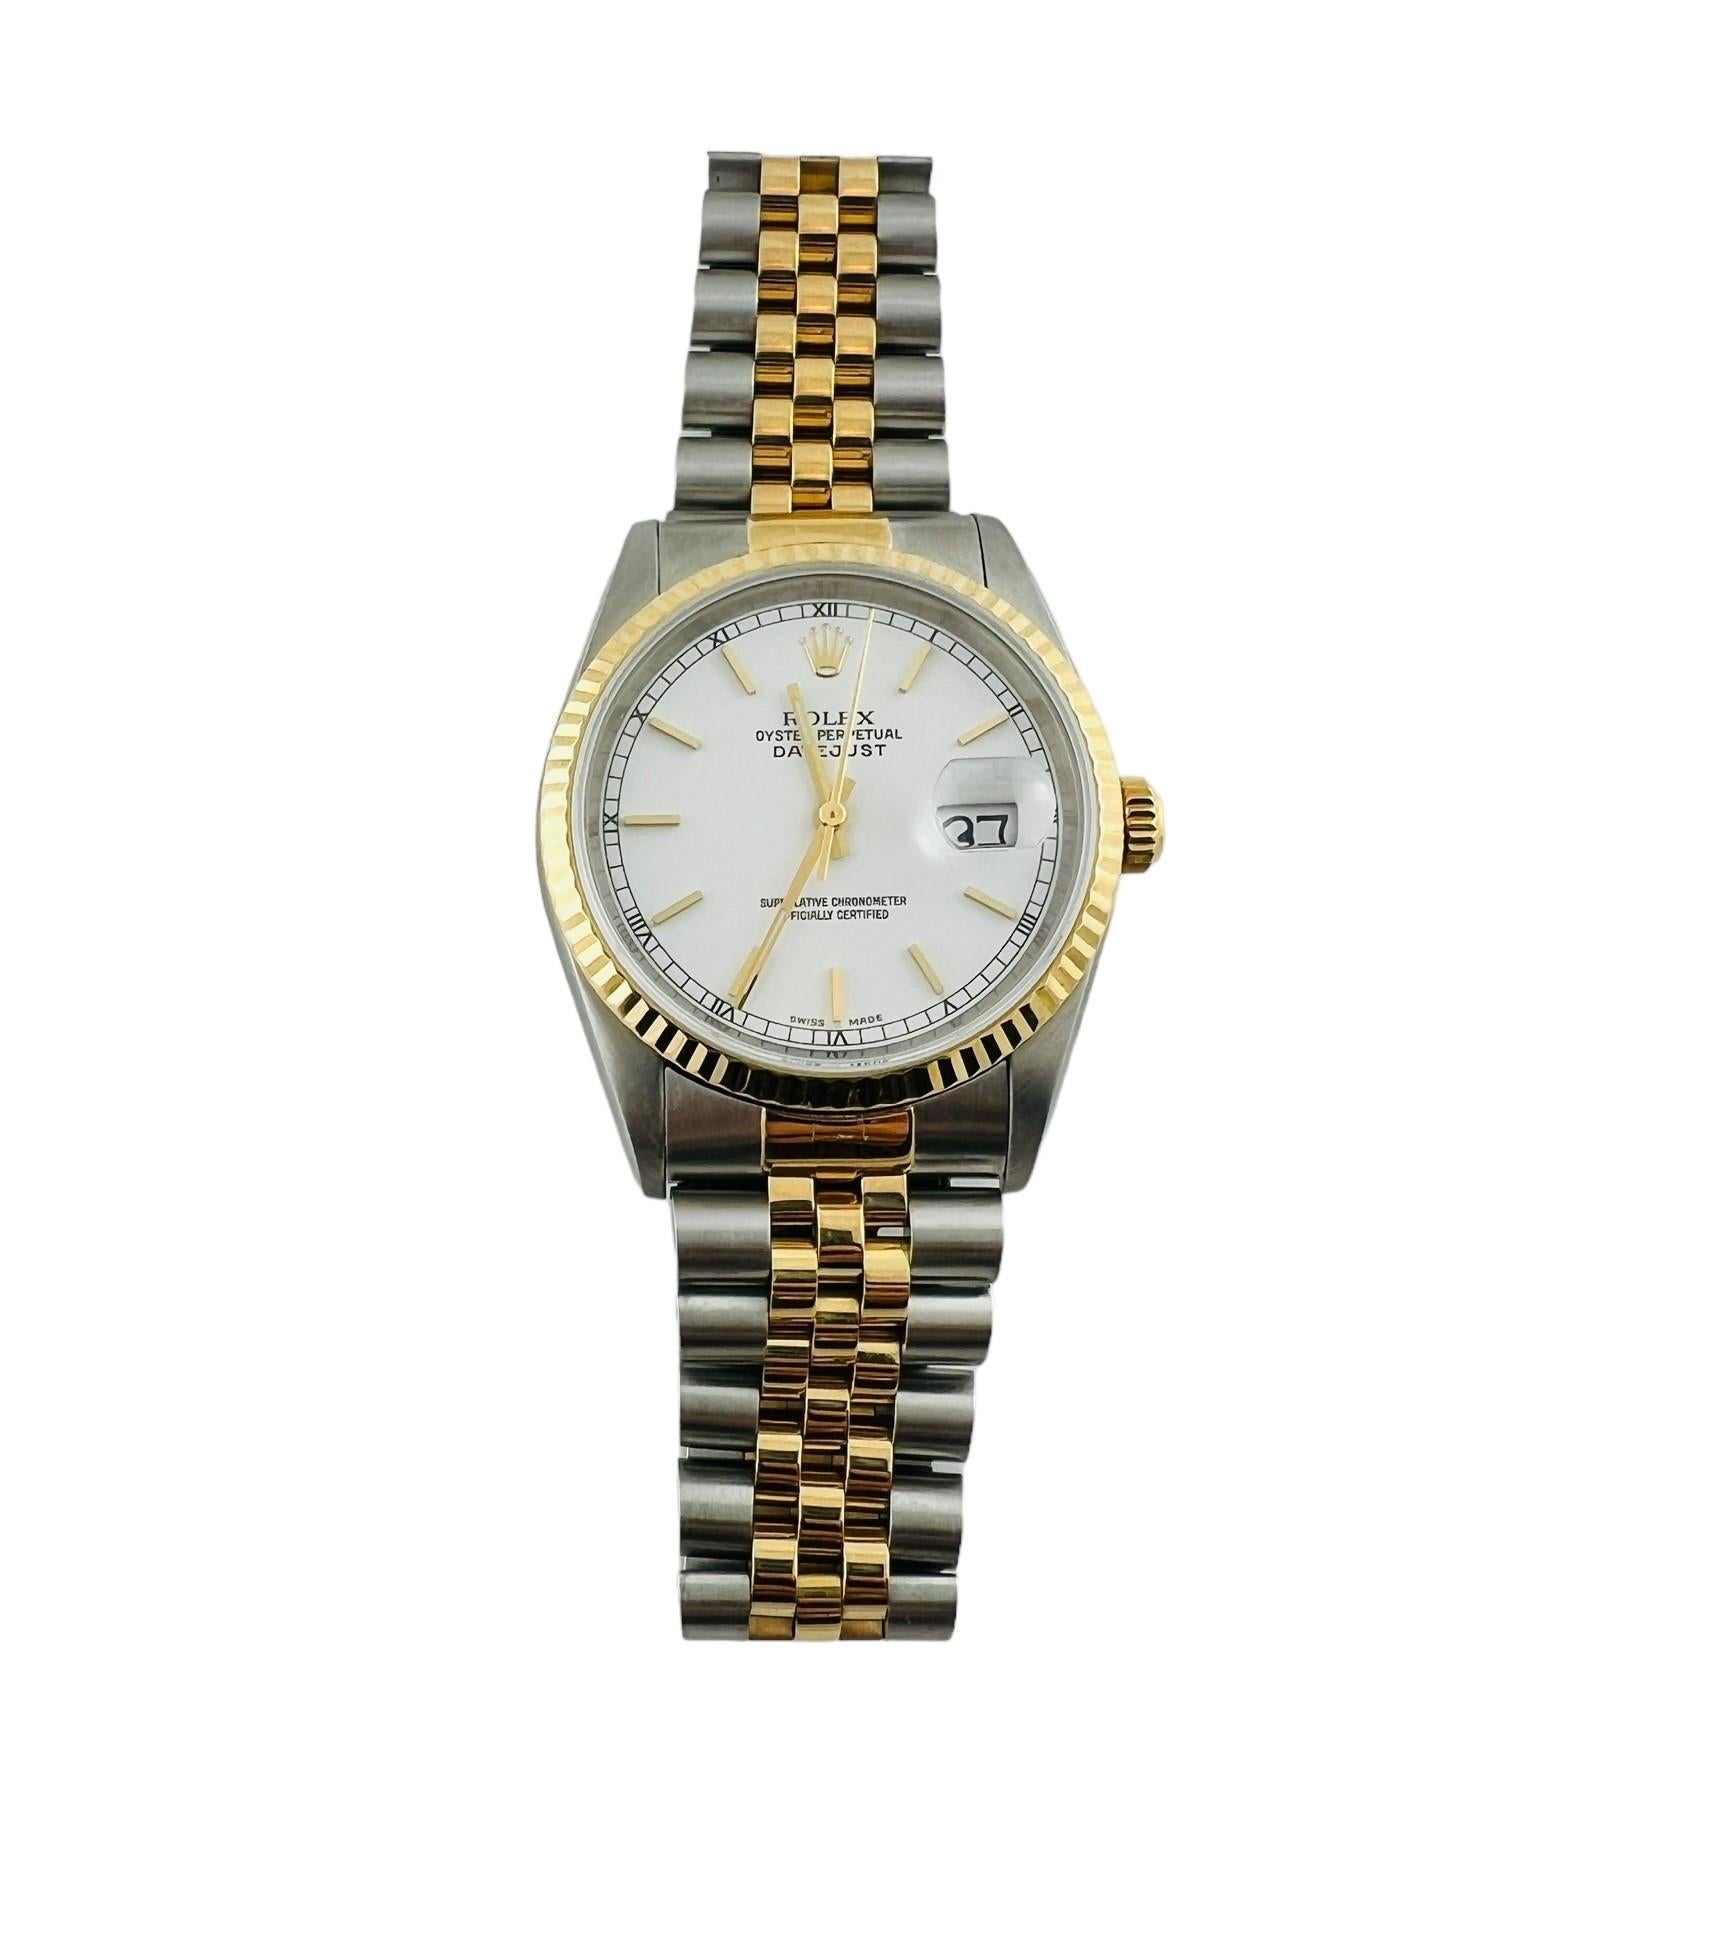 1997 Rolex Men's Oyster Perpetual Datejust Watch

Model: 16233
Serial: U896754

White Dial with gold stick markers

Automatic Movement

Stainless steel and 18K yellow gold

36mm case

Jubilee band fits up to 7 3/4